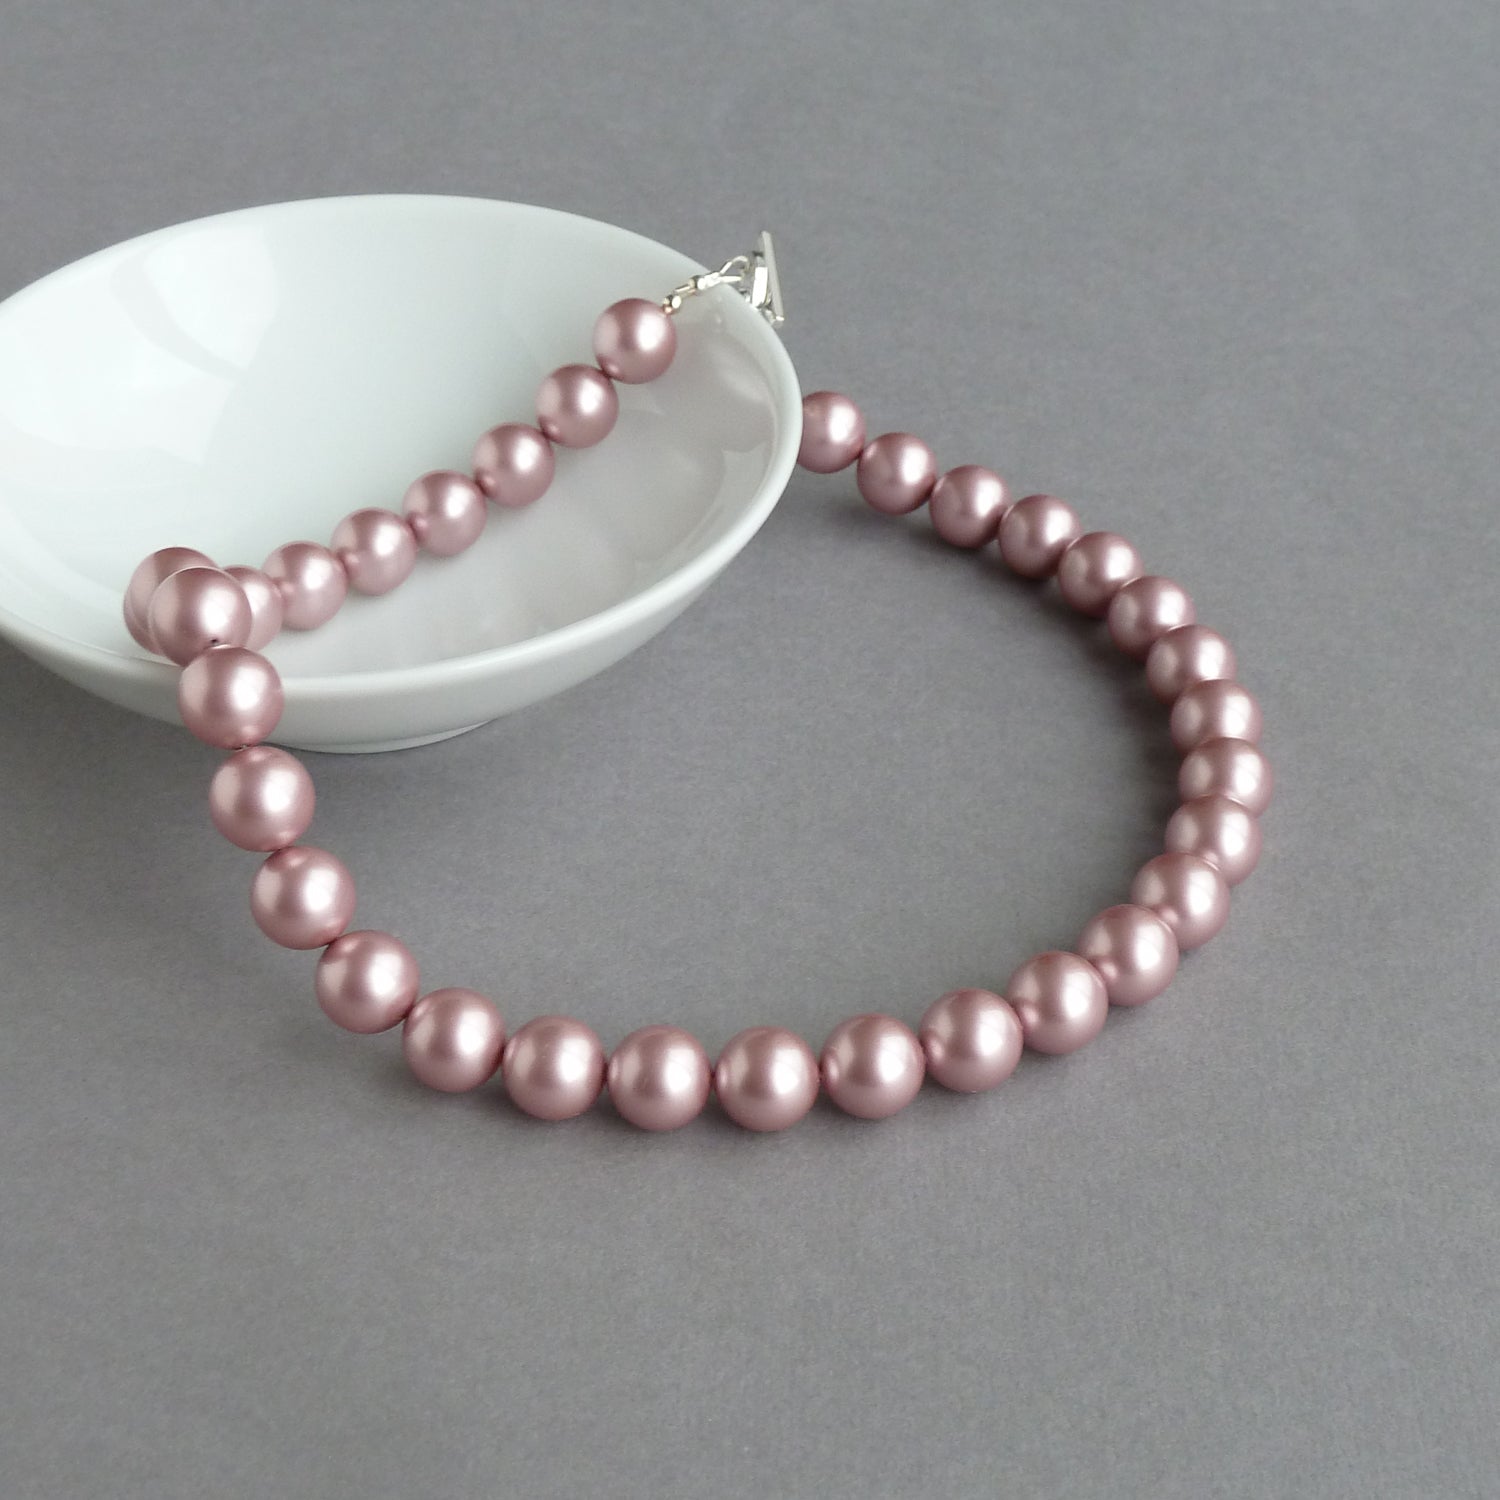 Chunky dusky pink pearl necklace for women